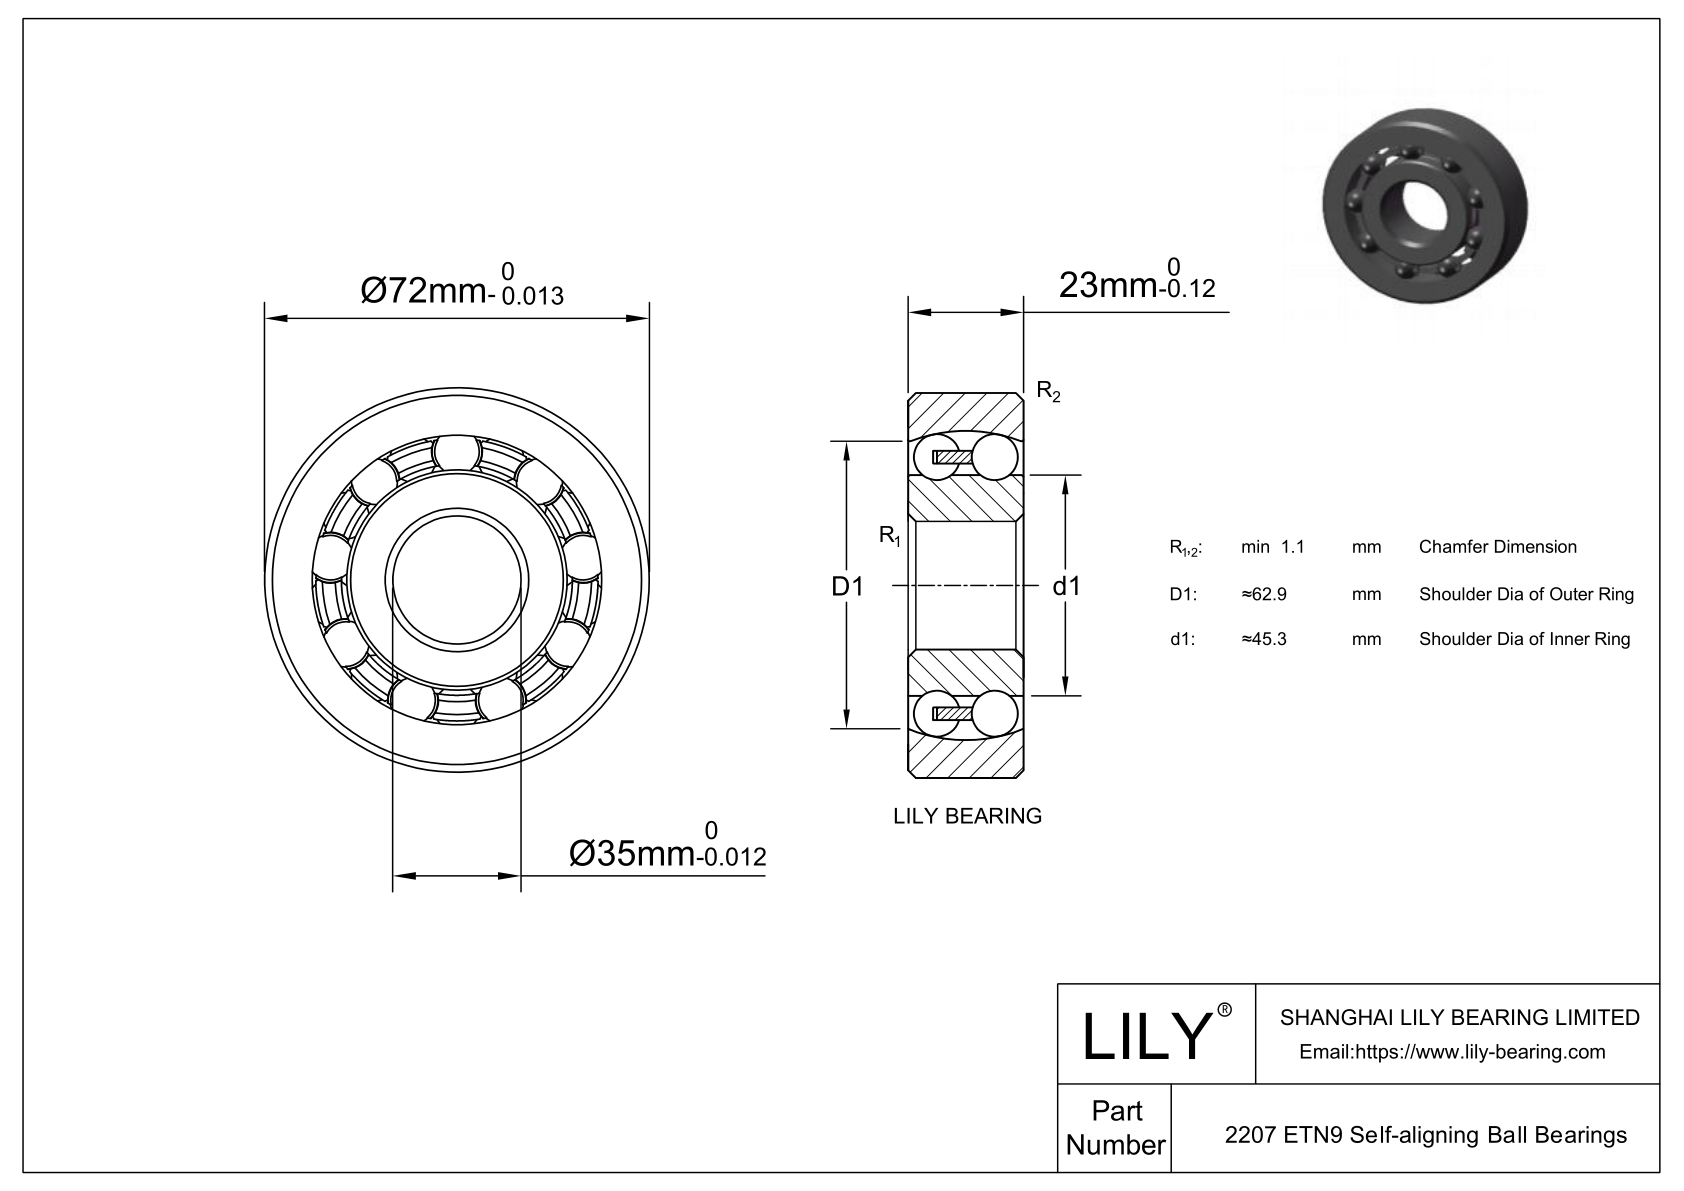 S2207 ETN9 Stainless Steel Self Aligning Ball Bearings cad drawing